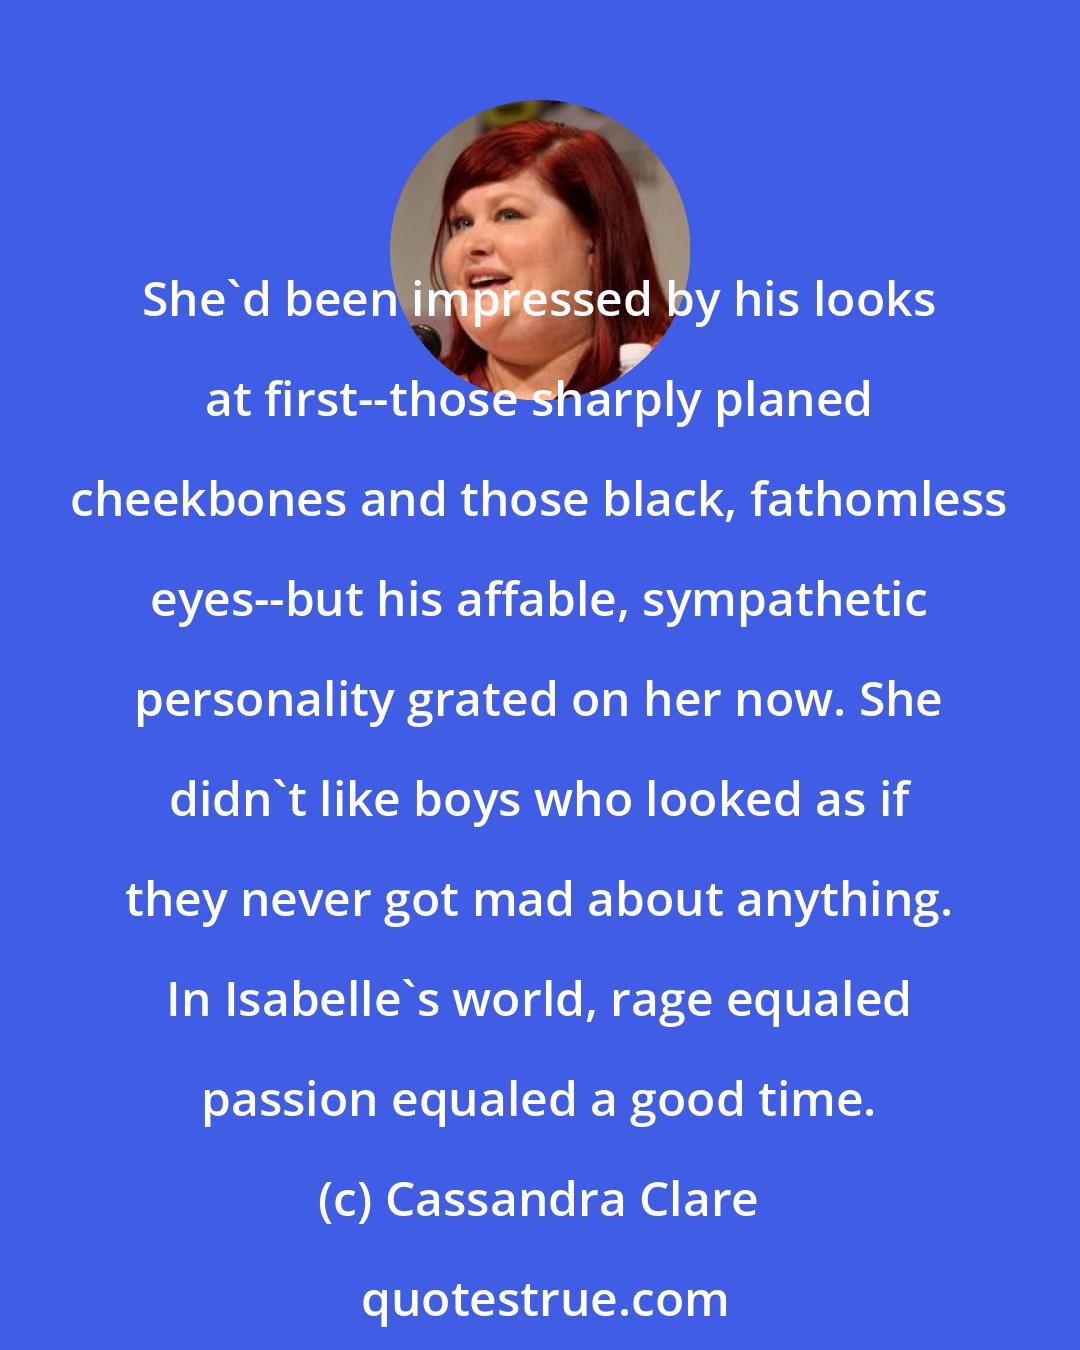 Cassandra Clare: She'd been impressed by his looks at first--those sharply planed cheekbones and those black, fathomless eyes--but his affable, sympathetic personality grated on her now. She didn't like boys who looked as if they never got mad about anything. In Isabelle's world, rage equaled passion equaled a good time.